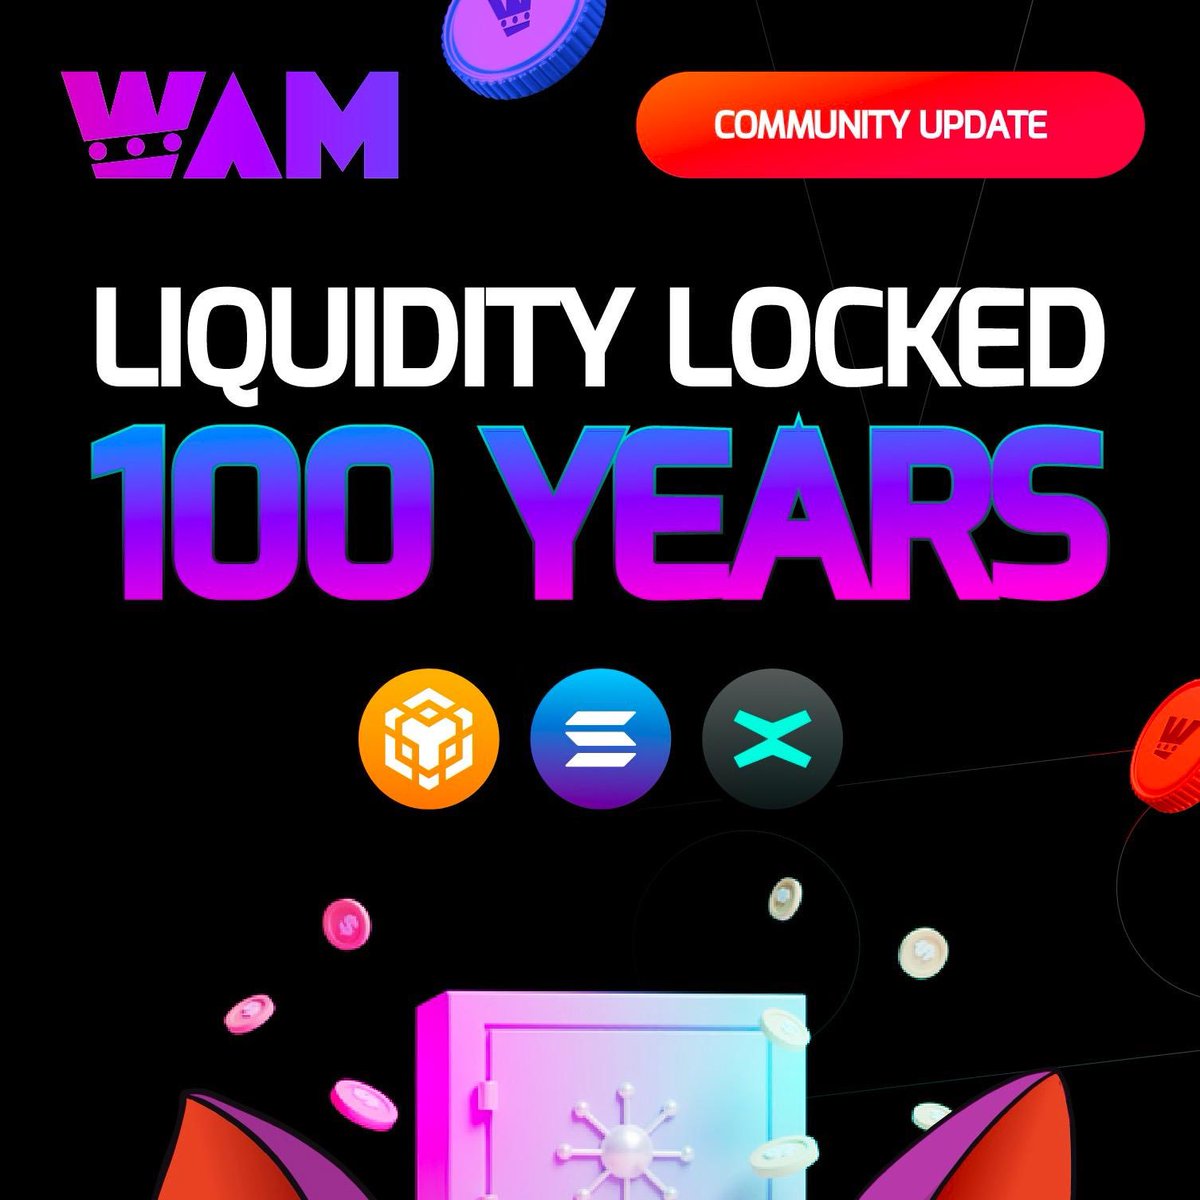 🚀 Big Announcement Alert! 🔒 Tonight, we're locking our liquidity for an unprecedented 100 YEARS! 💎 That's right, a century of rock-solid stability and unwavering commitment towards $WAM. 🚨 The Lock Event will occur tonight between 8-10 PM EEST time. #liquiditylock